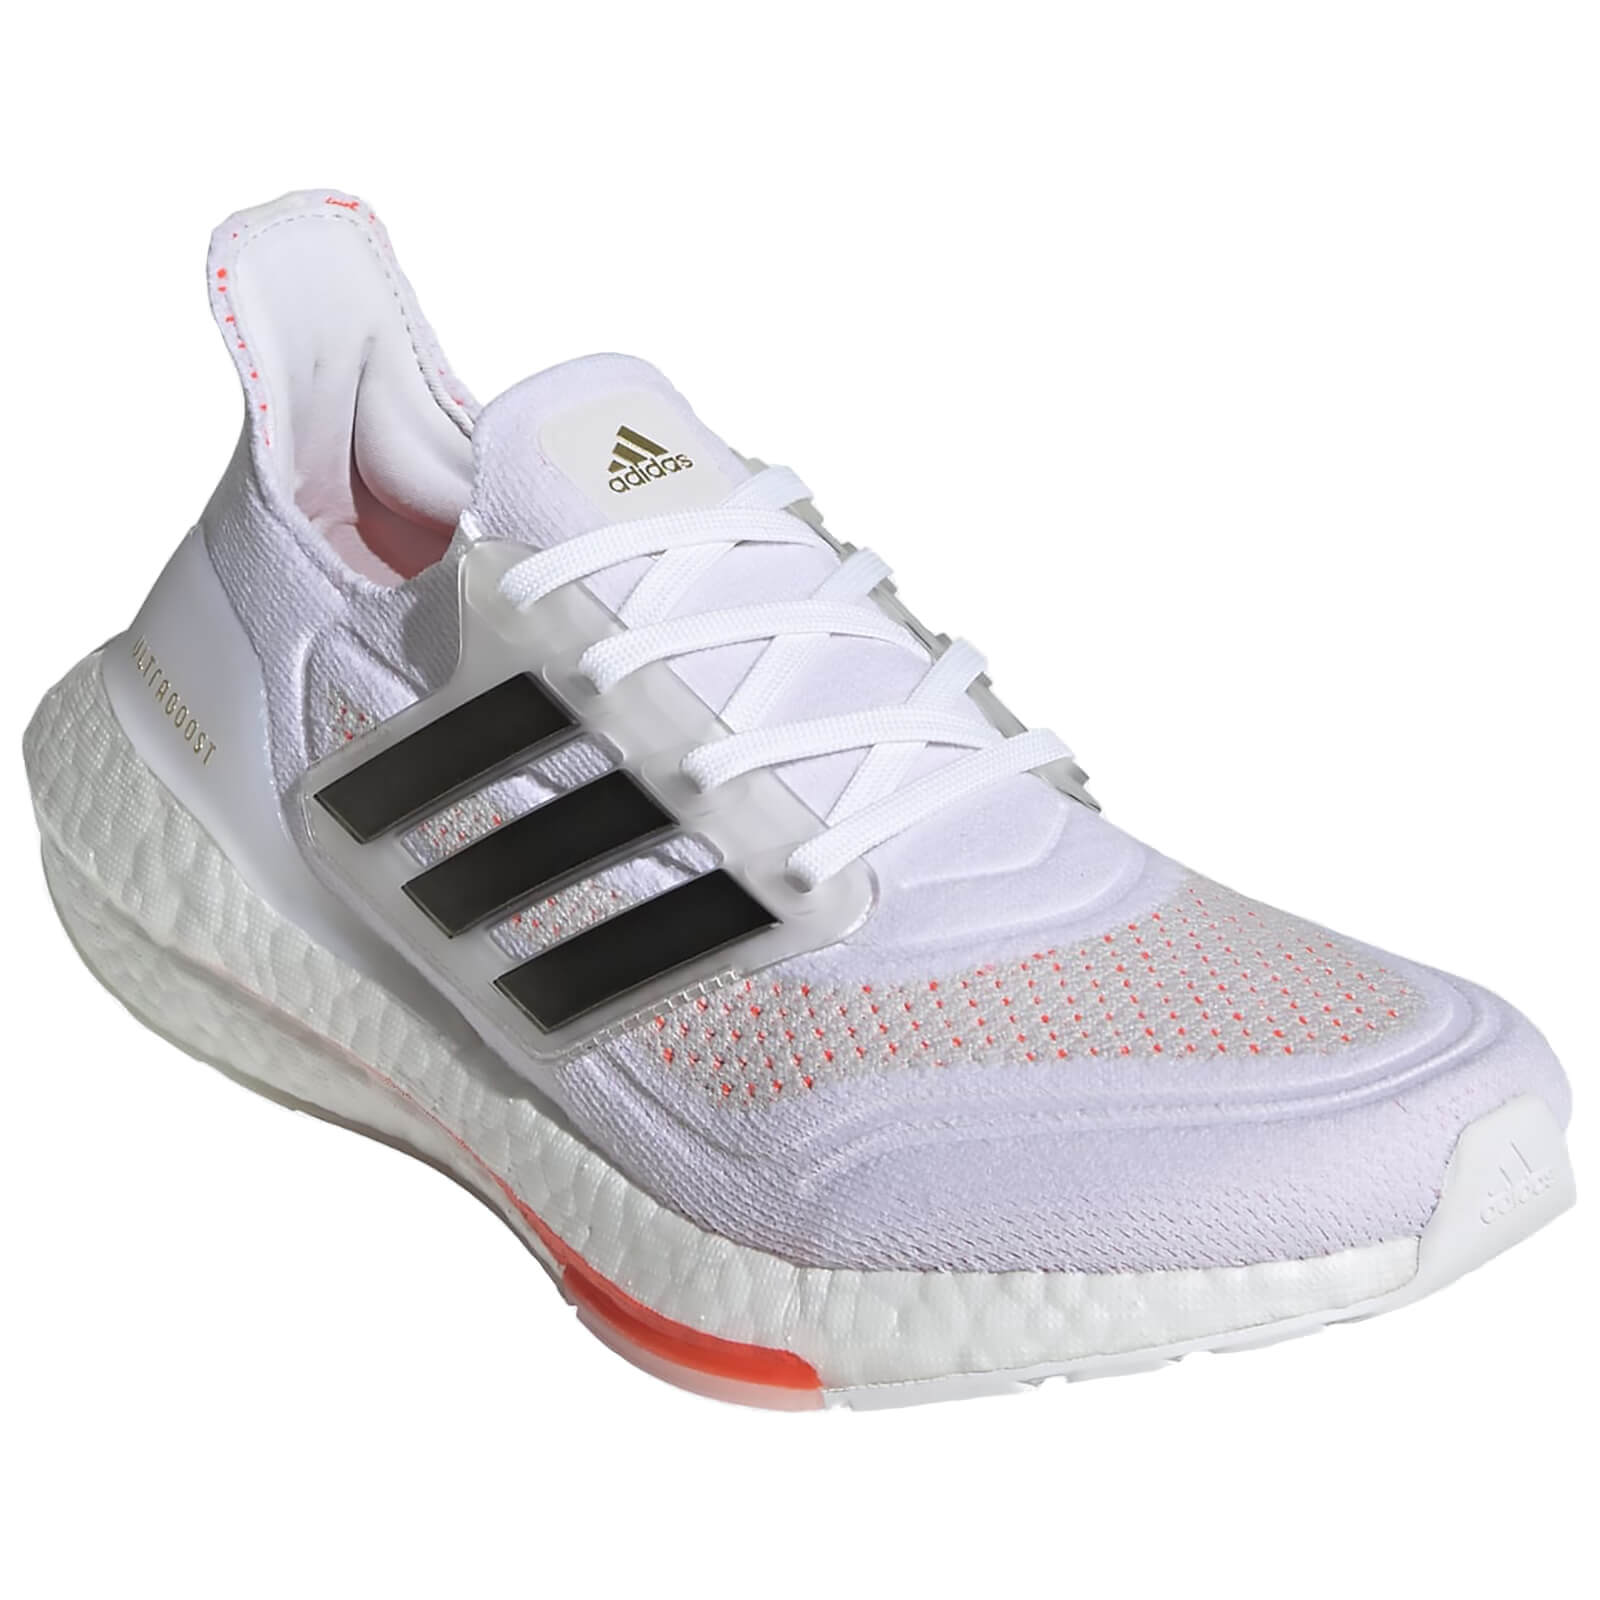 adidas Women's Ultra Boost 21 Running Shoes - Ftwr White/Core Black/Solar Red - US 8.5/UK 7